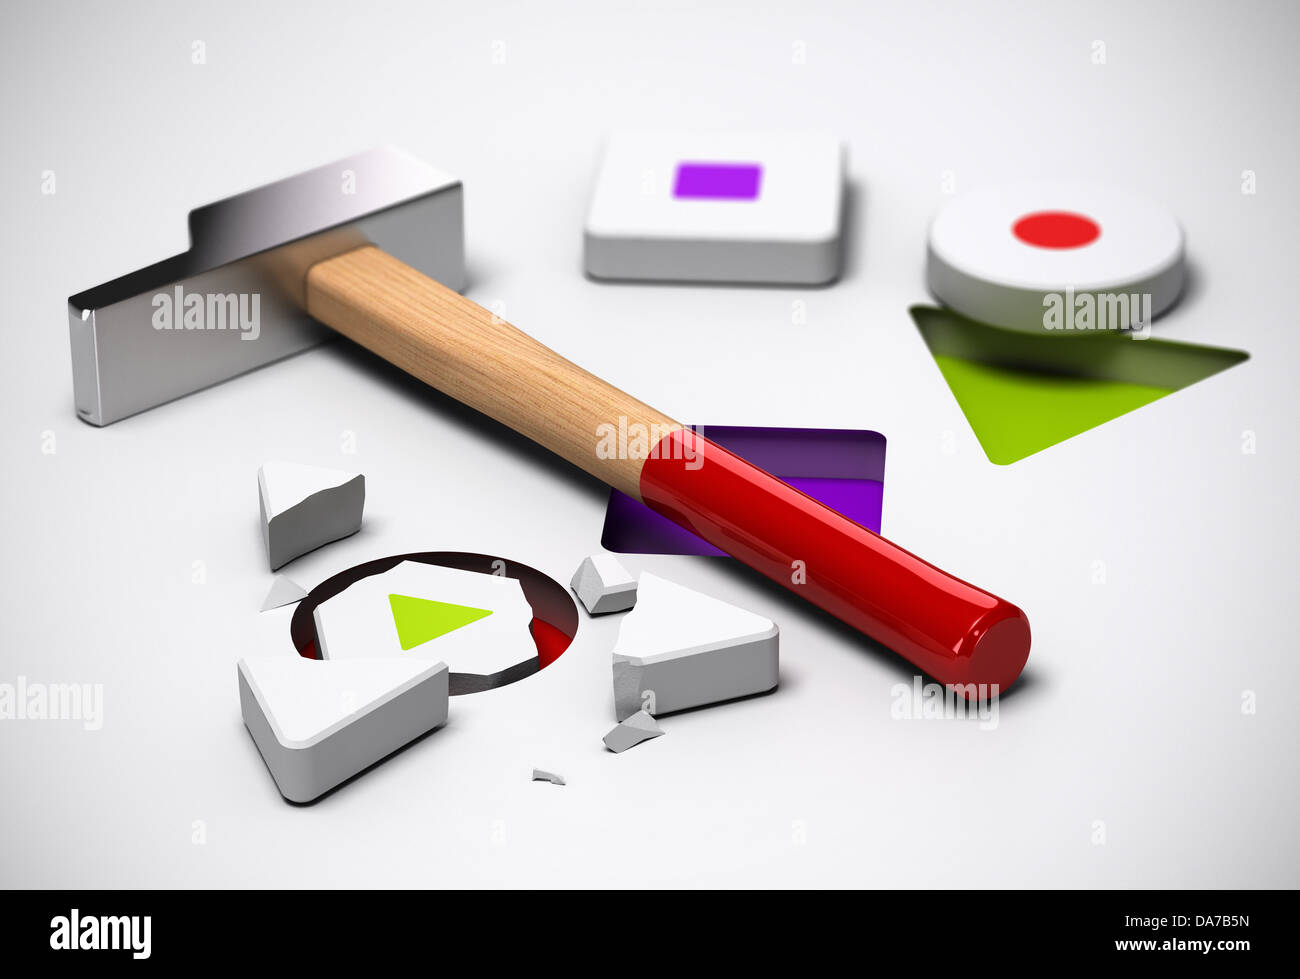 Intelligence test with different shapes and a hammer Stock Photo